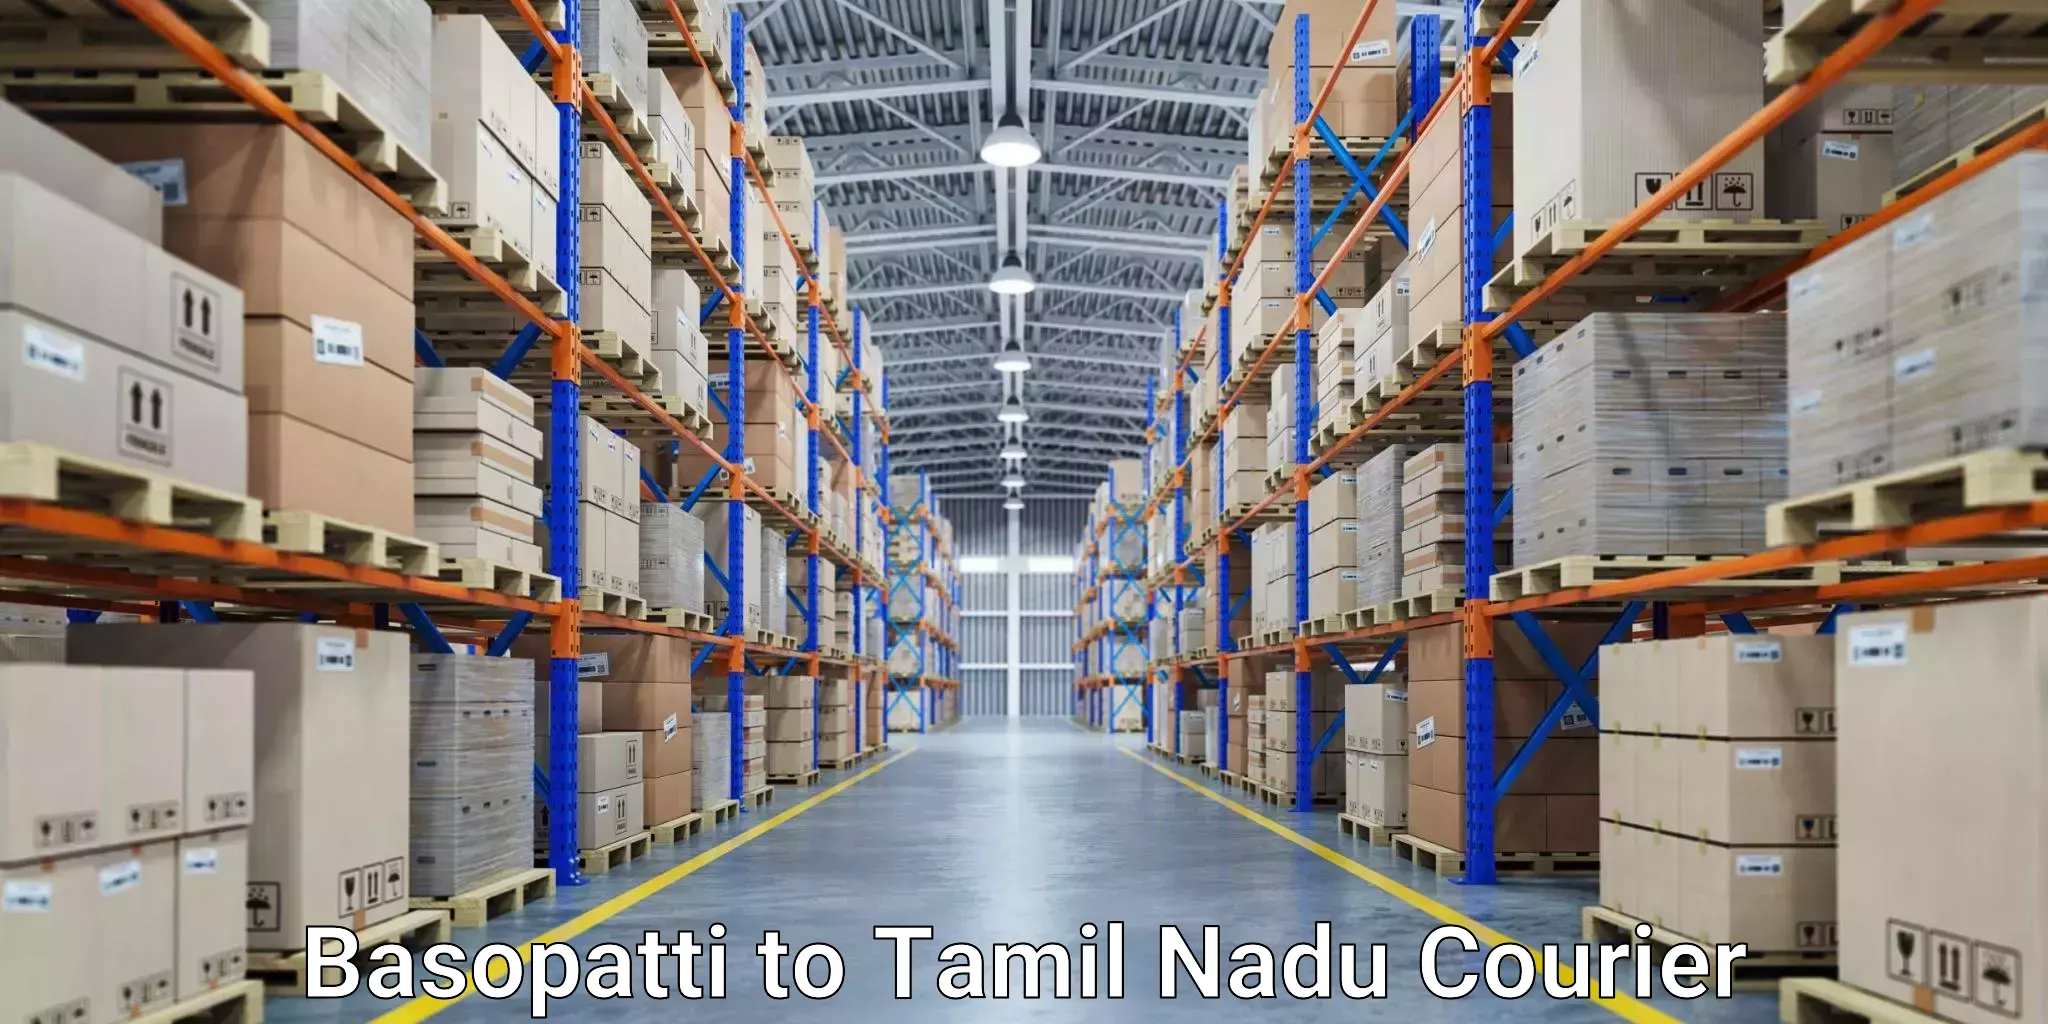 Flexible delivery scheduling Basopatti to Tamil Nadu